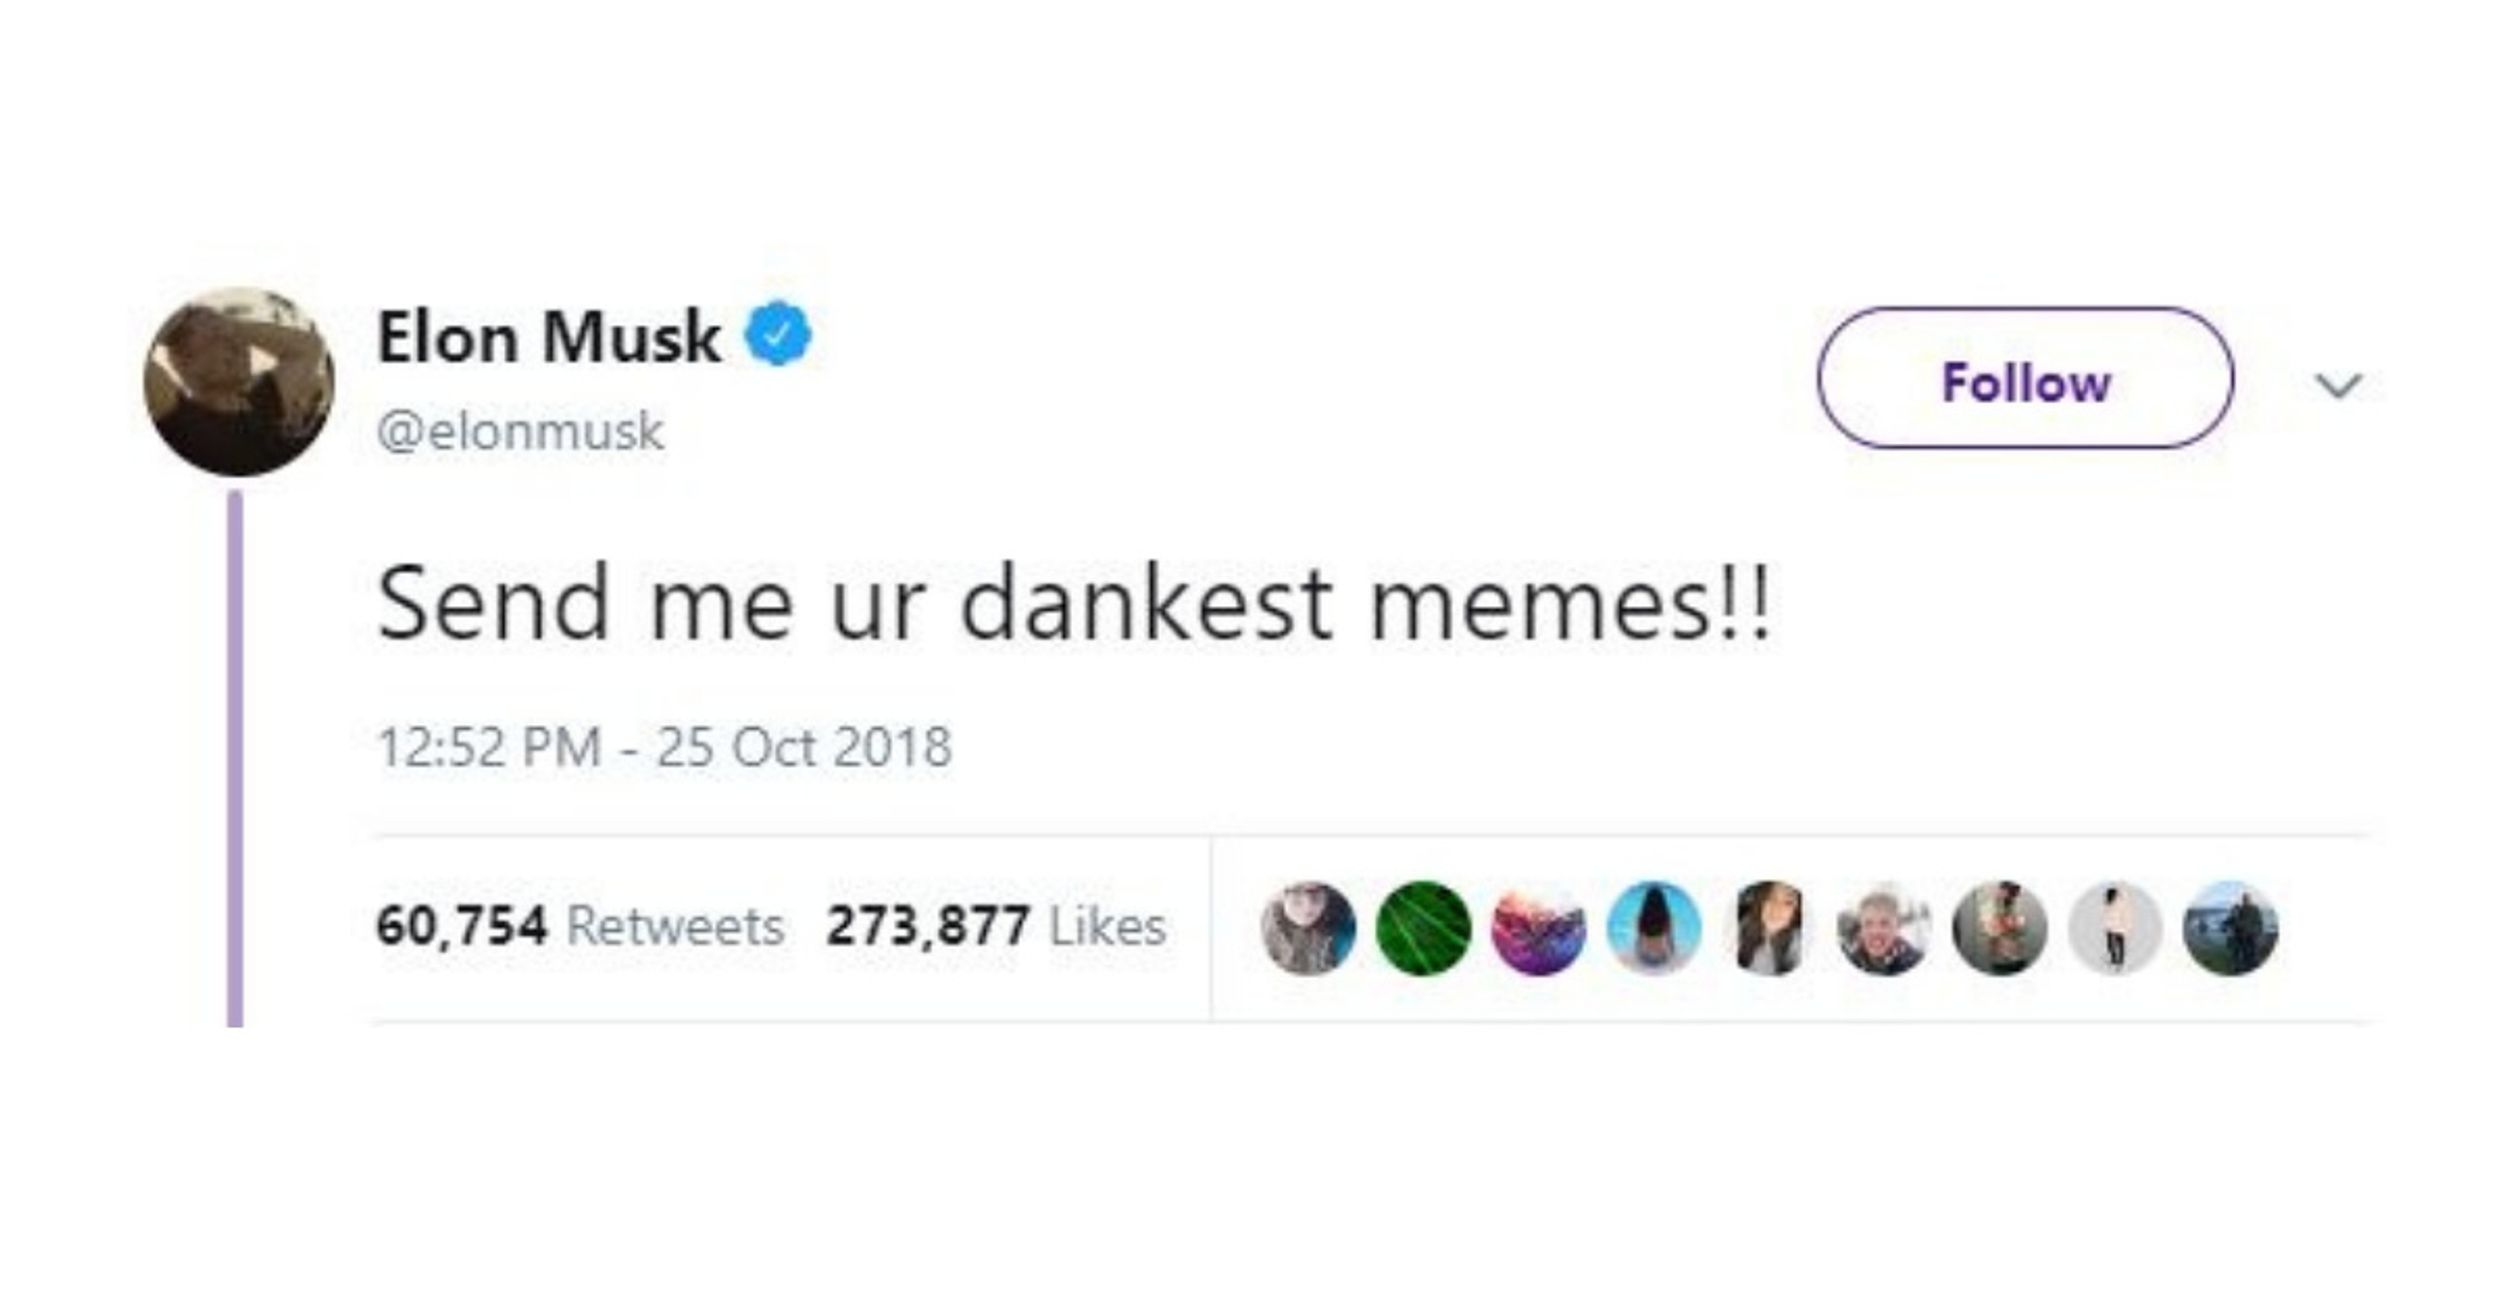 Elon Musk Asked His Followers To Send Him 'Dank Memes' And Got Roasted In The Process